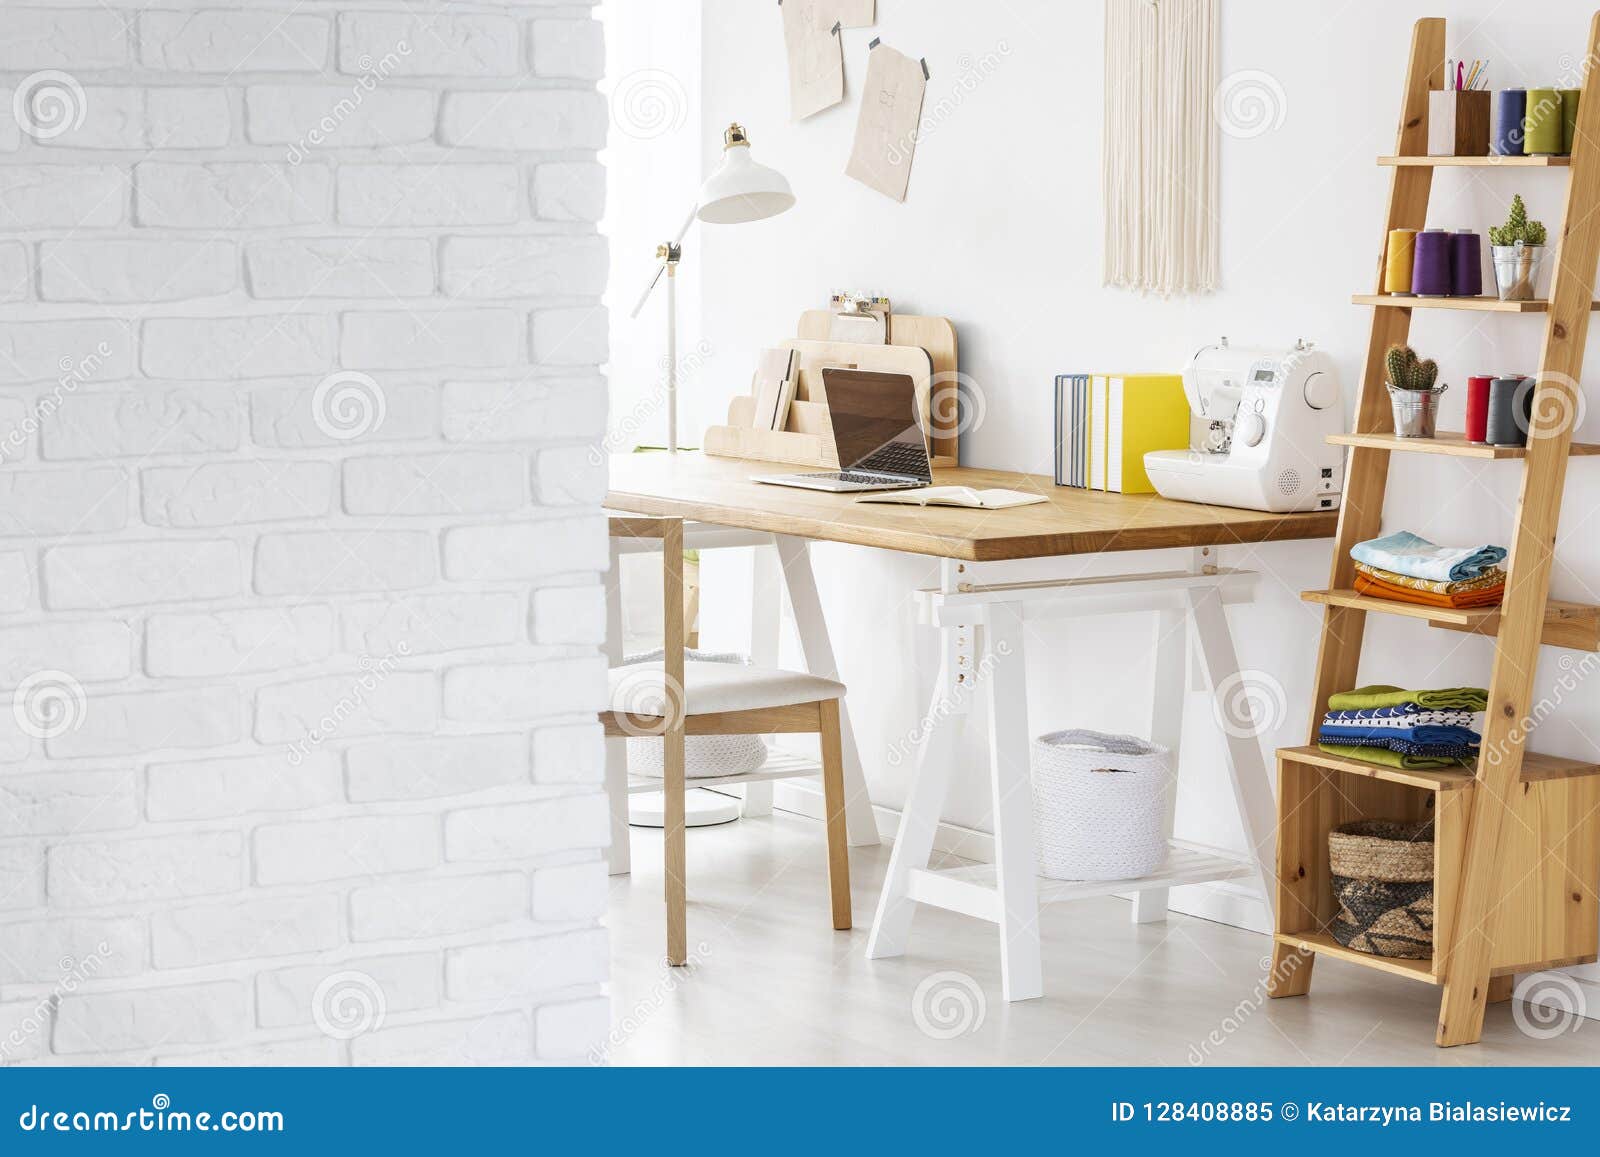 Close Up Of A Brick Wall In A Home Office Interior Stock Image